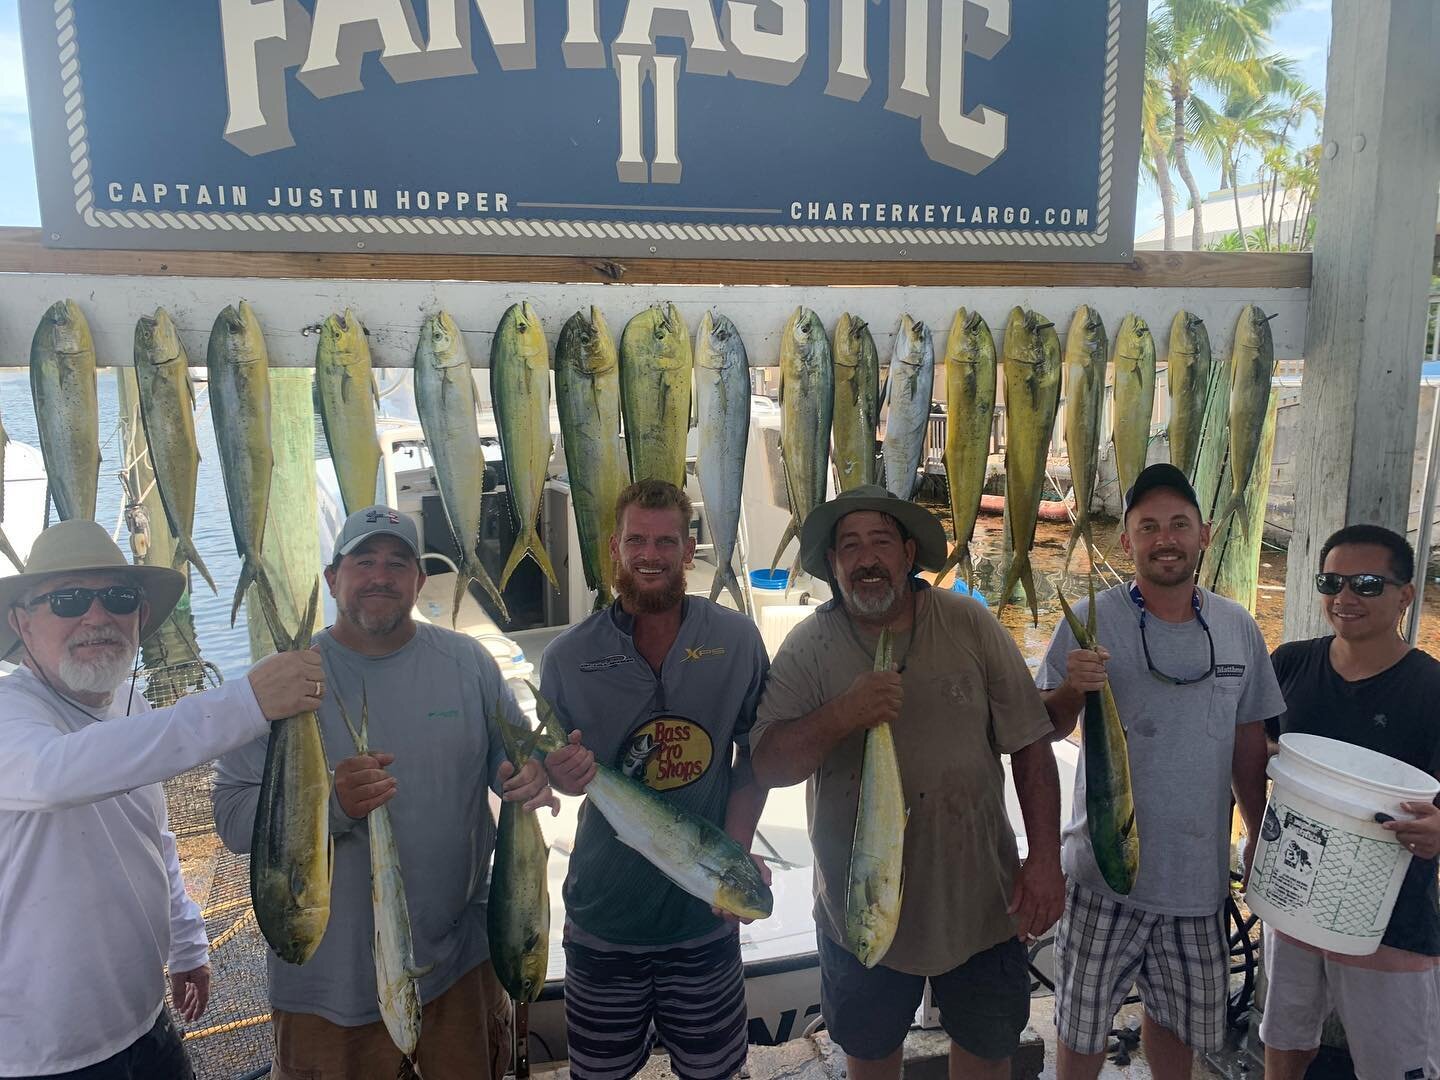 Bob and the crew killing it, catching some mahis on their annual trip this past week 

&bull;#GUARANTEEDFISH &bull;
&bull;
&bull;
#fantasticcharters #fantastic2 #mahi #offshore #keylargo #flkeys #charterboat #busdriver #waterpark #july #dolphinfish #